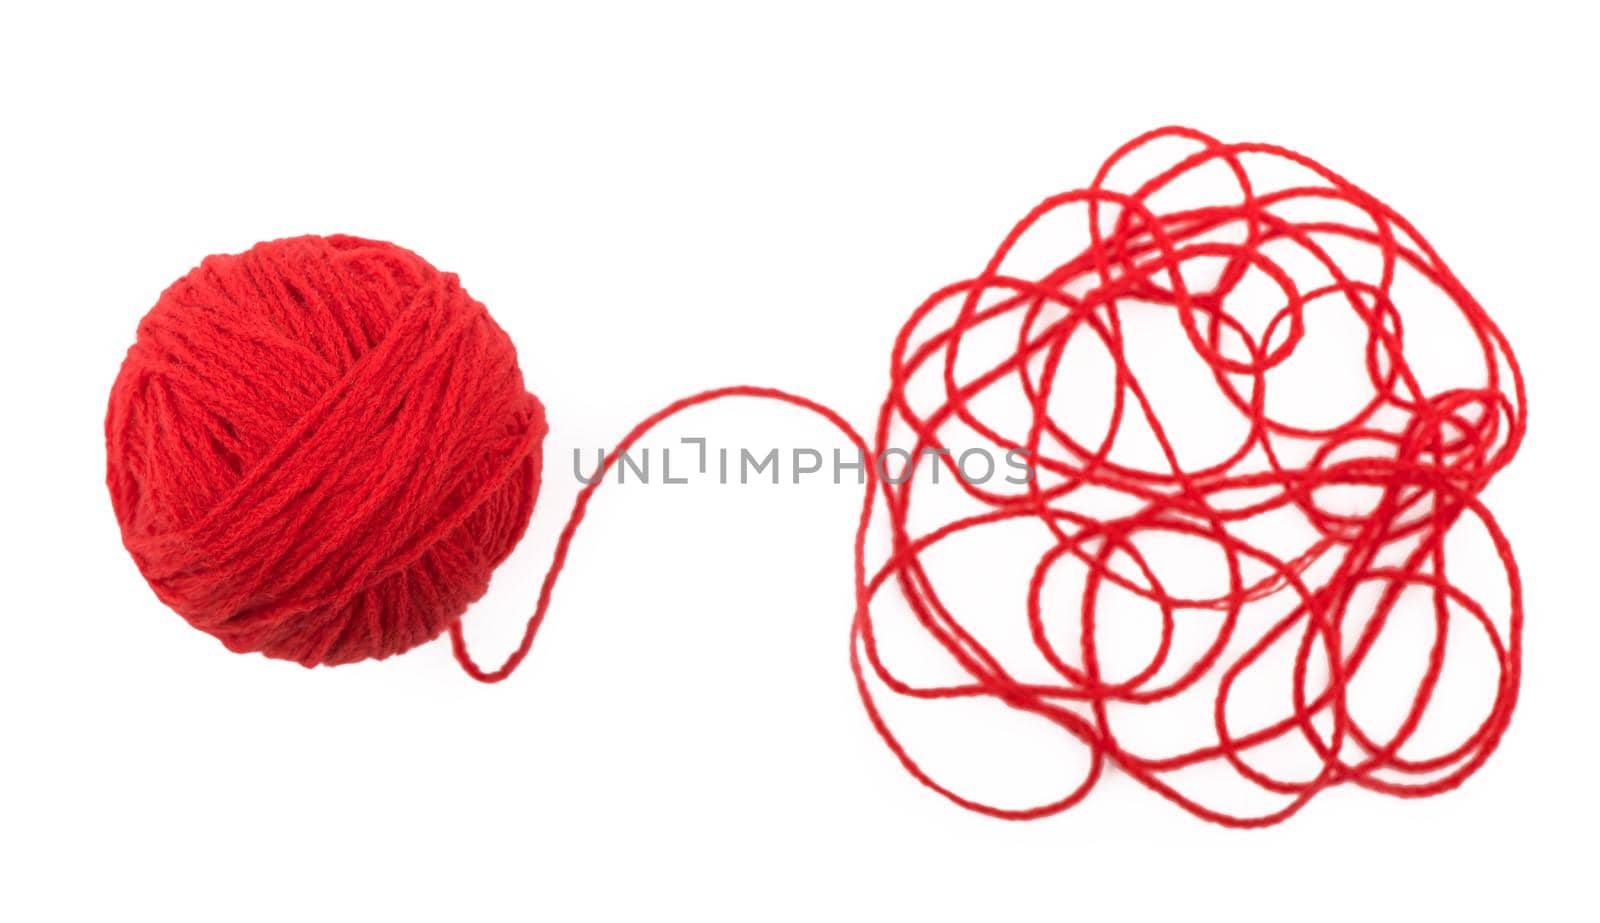 The idea is a tangled thread. Red ball of yarn on white background